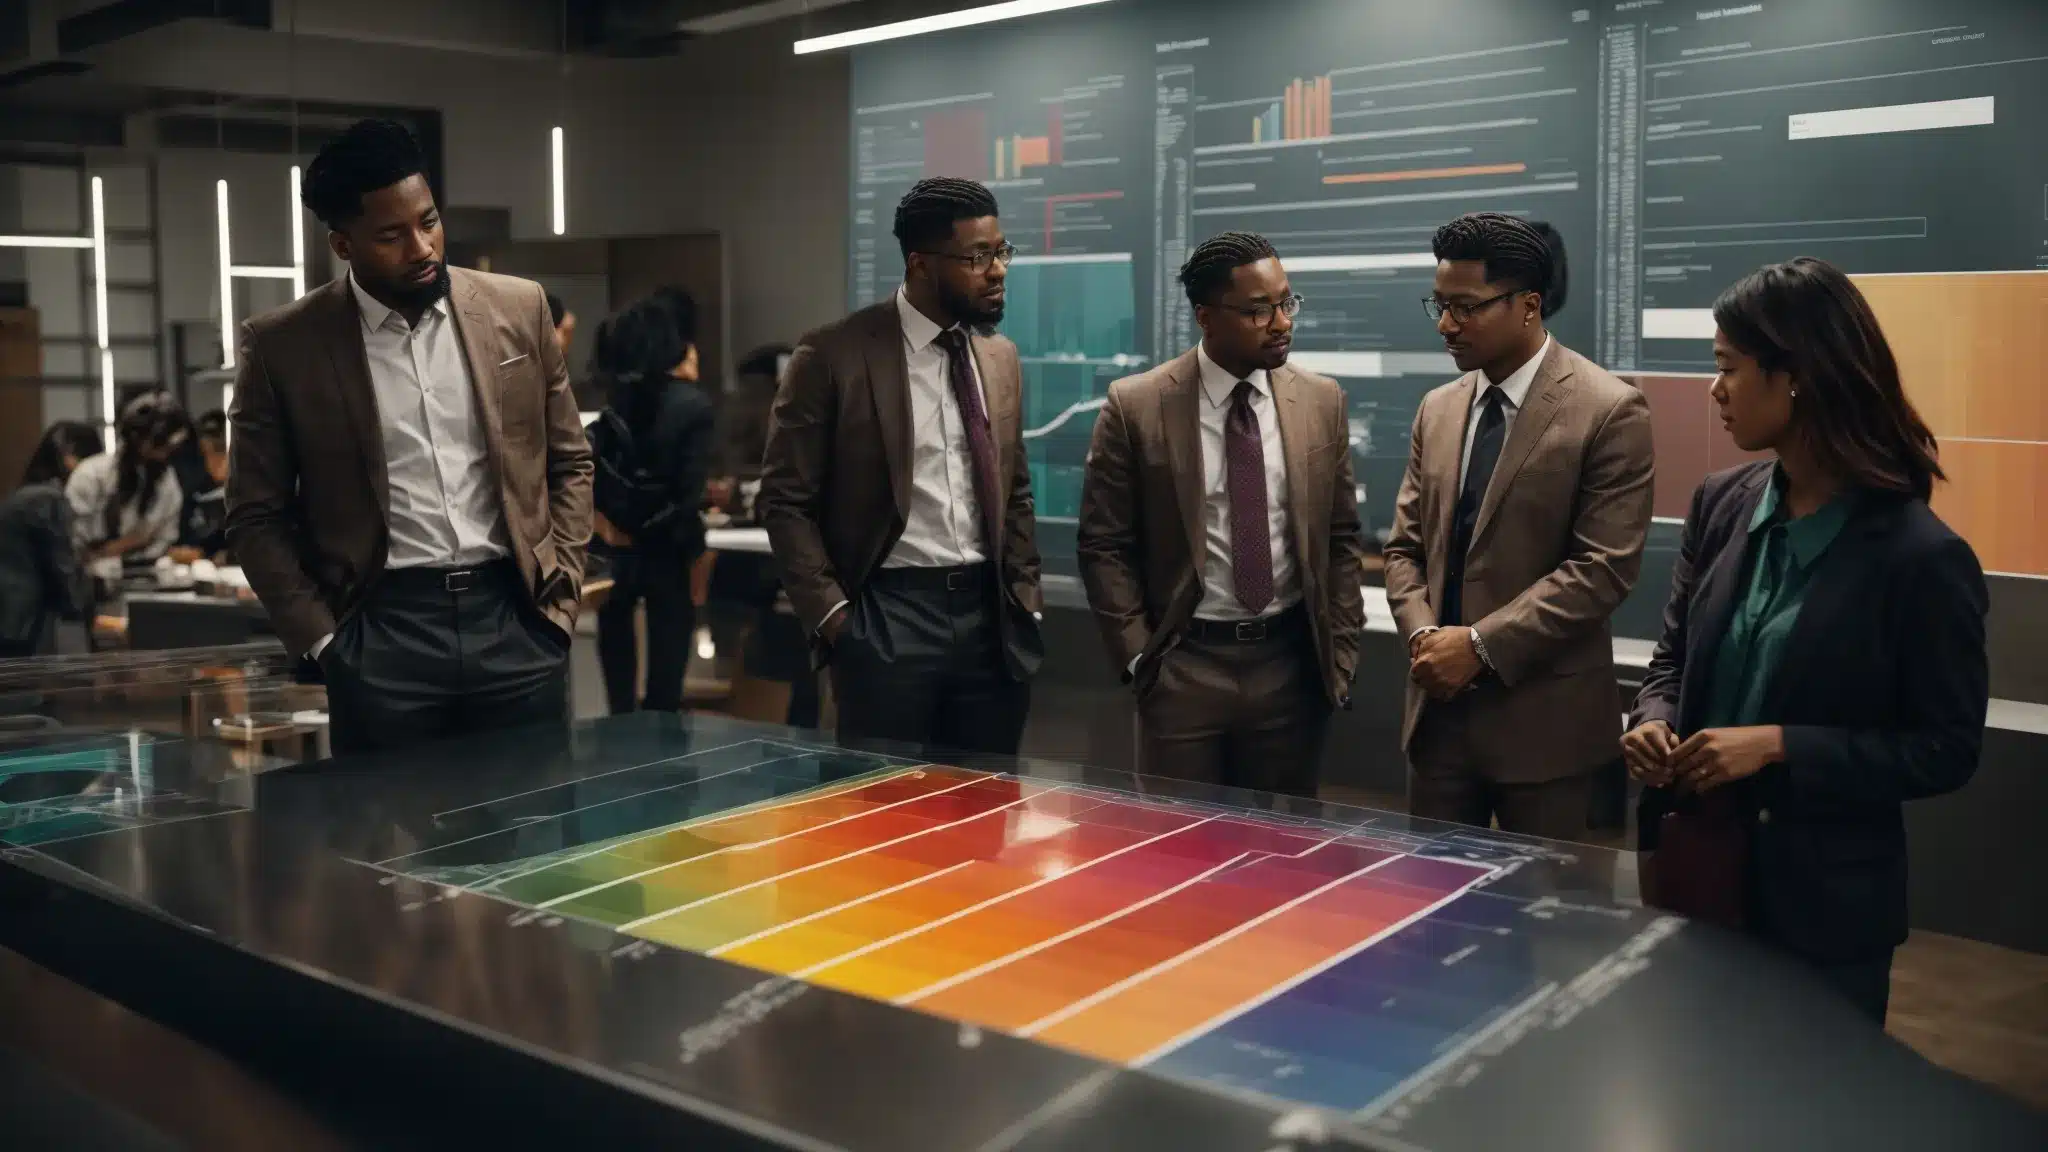 A Diverse Group Of People Standing Around A Large Table, Examining And Discussing Colorful Graphs And Diagrams Representing Different Market Sectors.